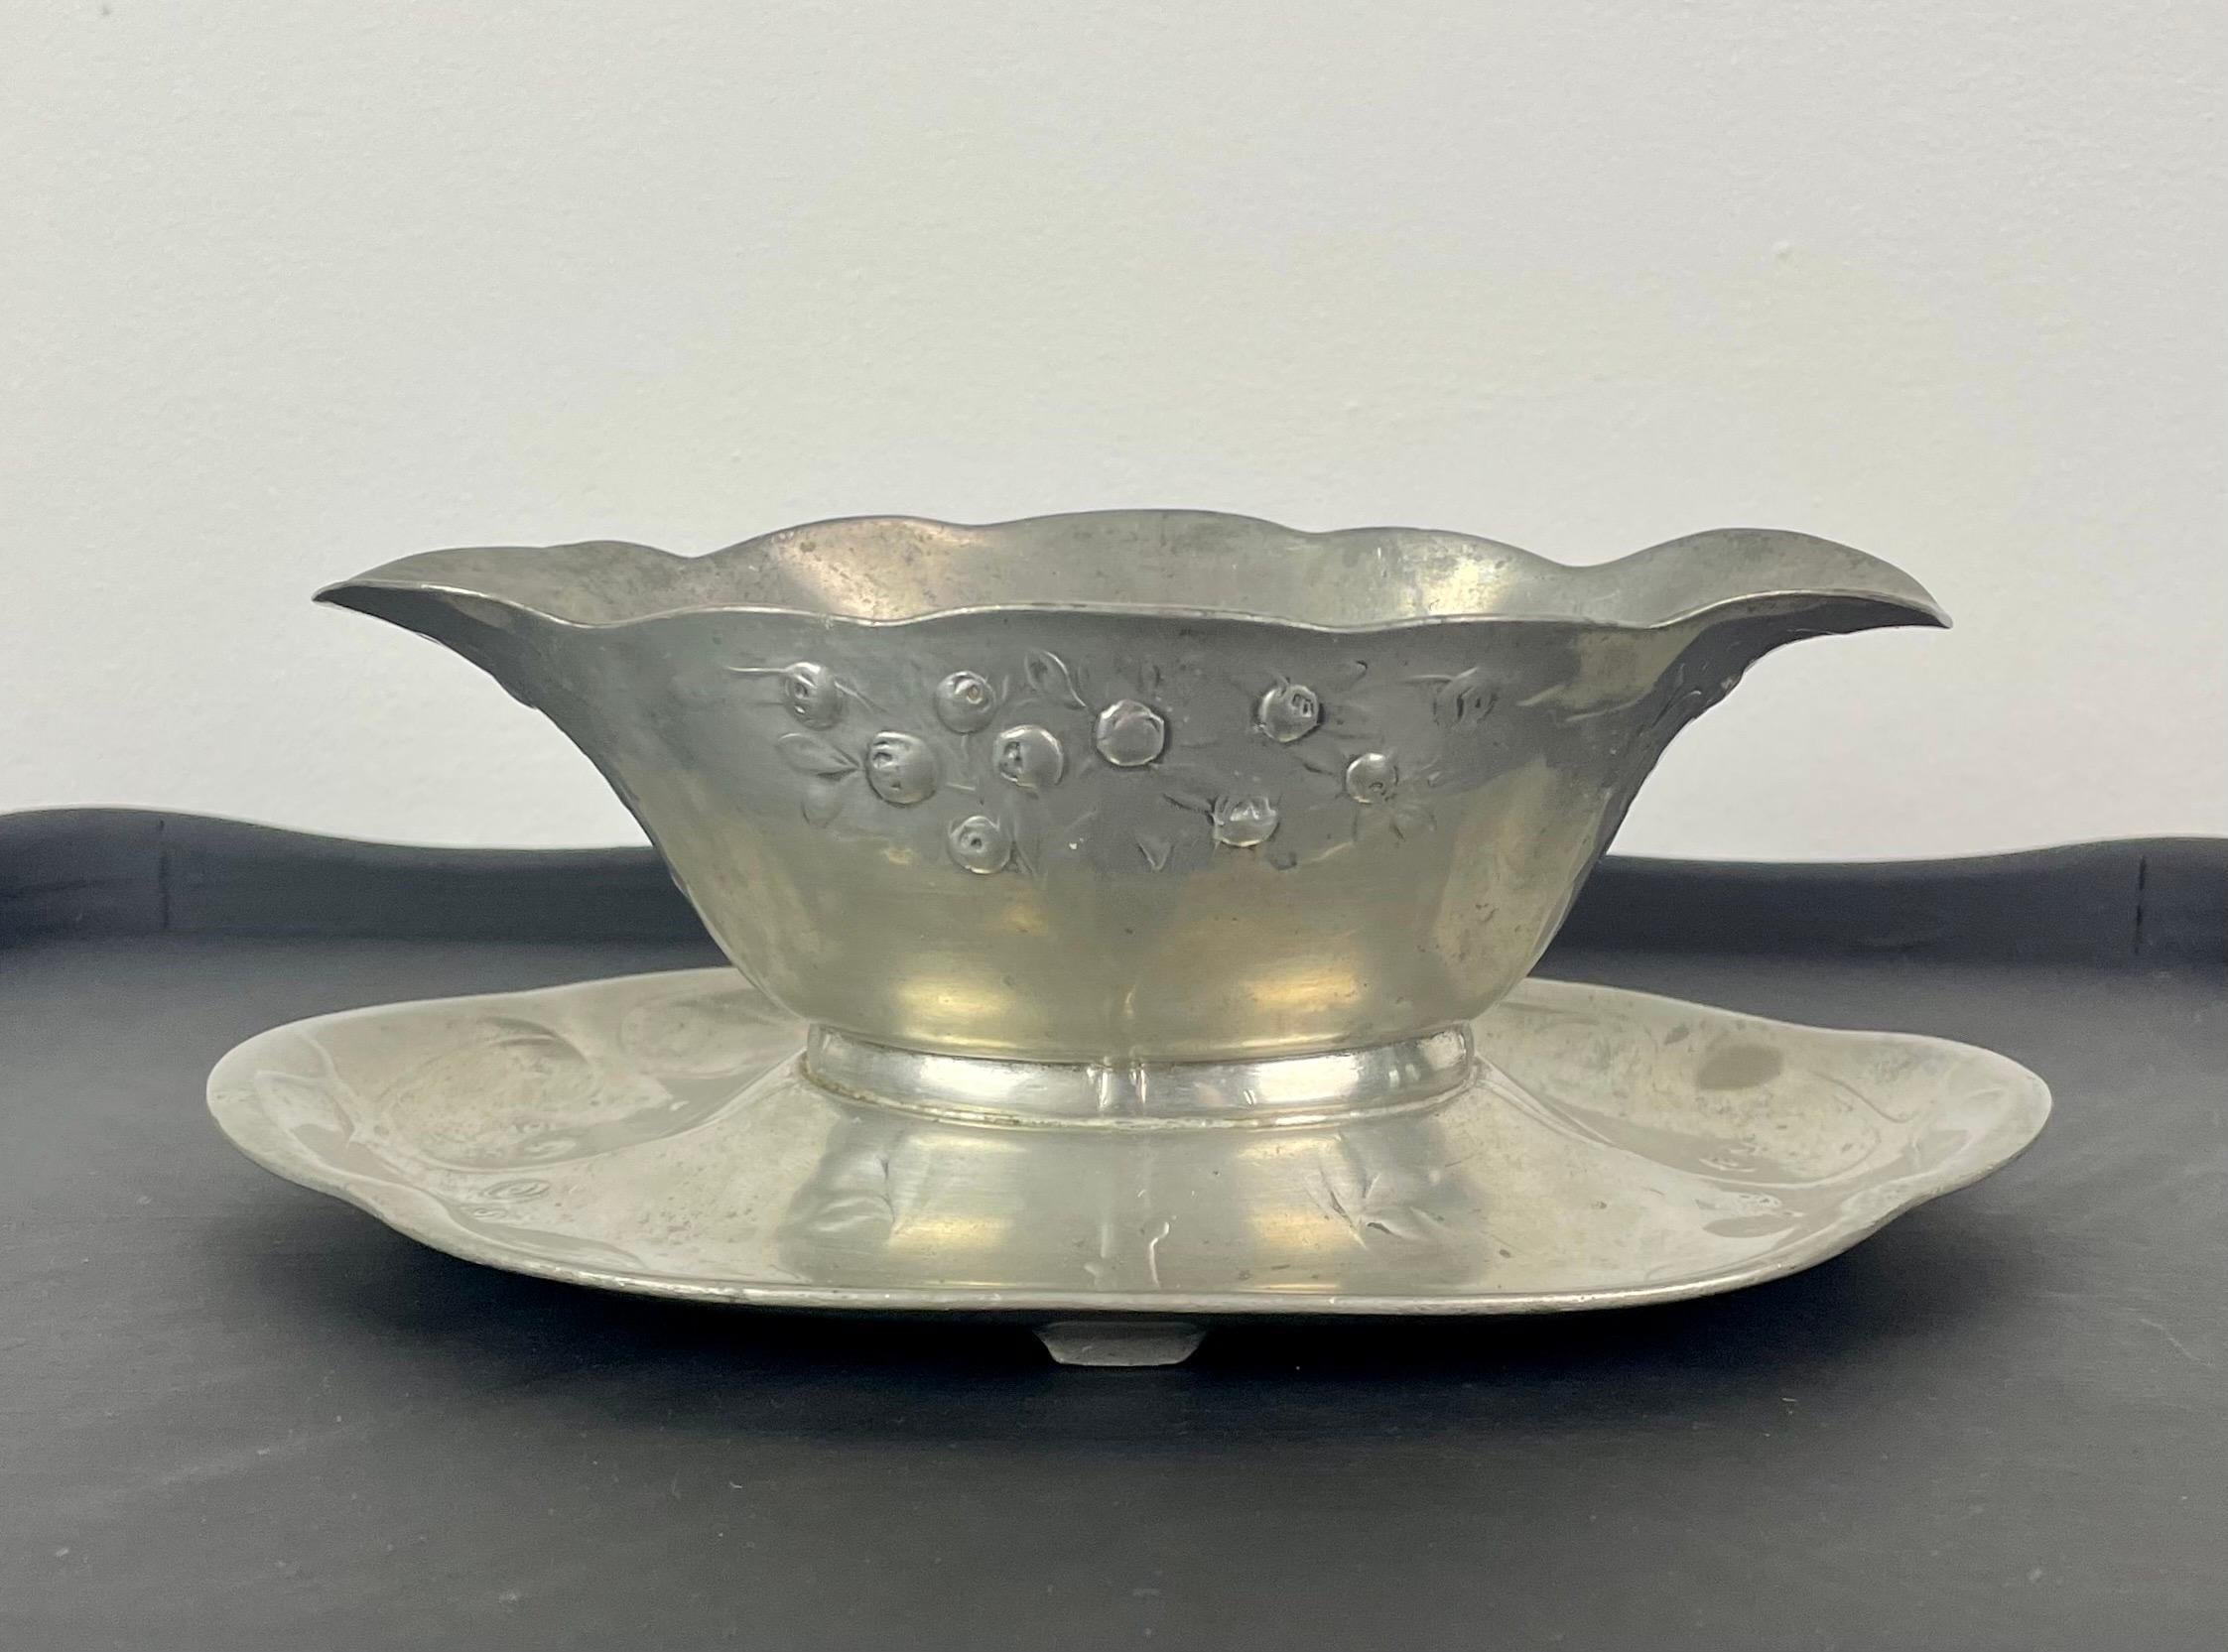 Beautiful pewter sauce boat/cup/empty pocket. With floral decoration.
Kayserzinn. Model No. 4299
Numbered 29
1900s
Art Nouveau
Kayserzinn was the brand name for the lead-free artistic metal alloy manufactured at the turn of the century by JP